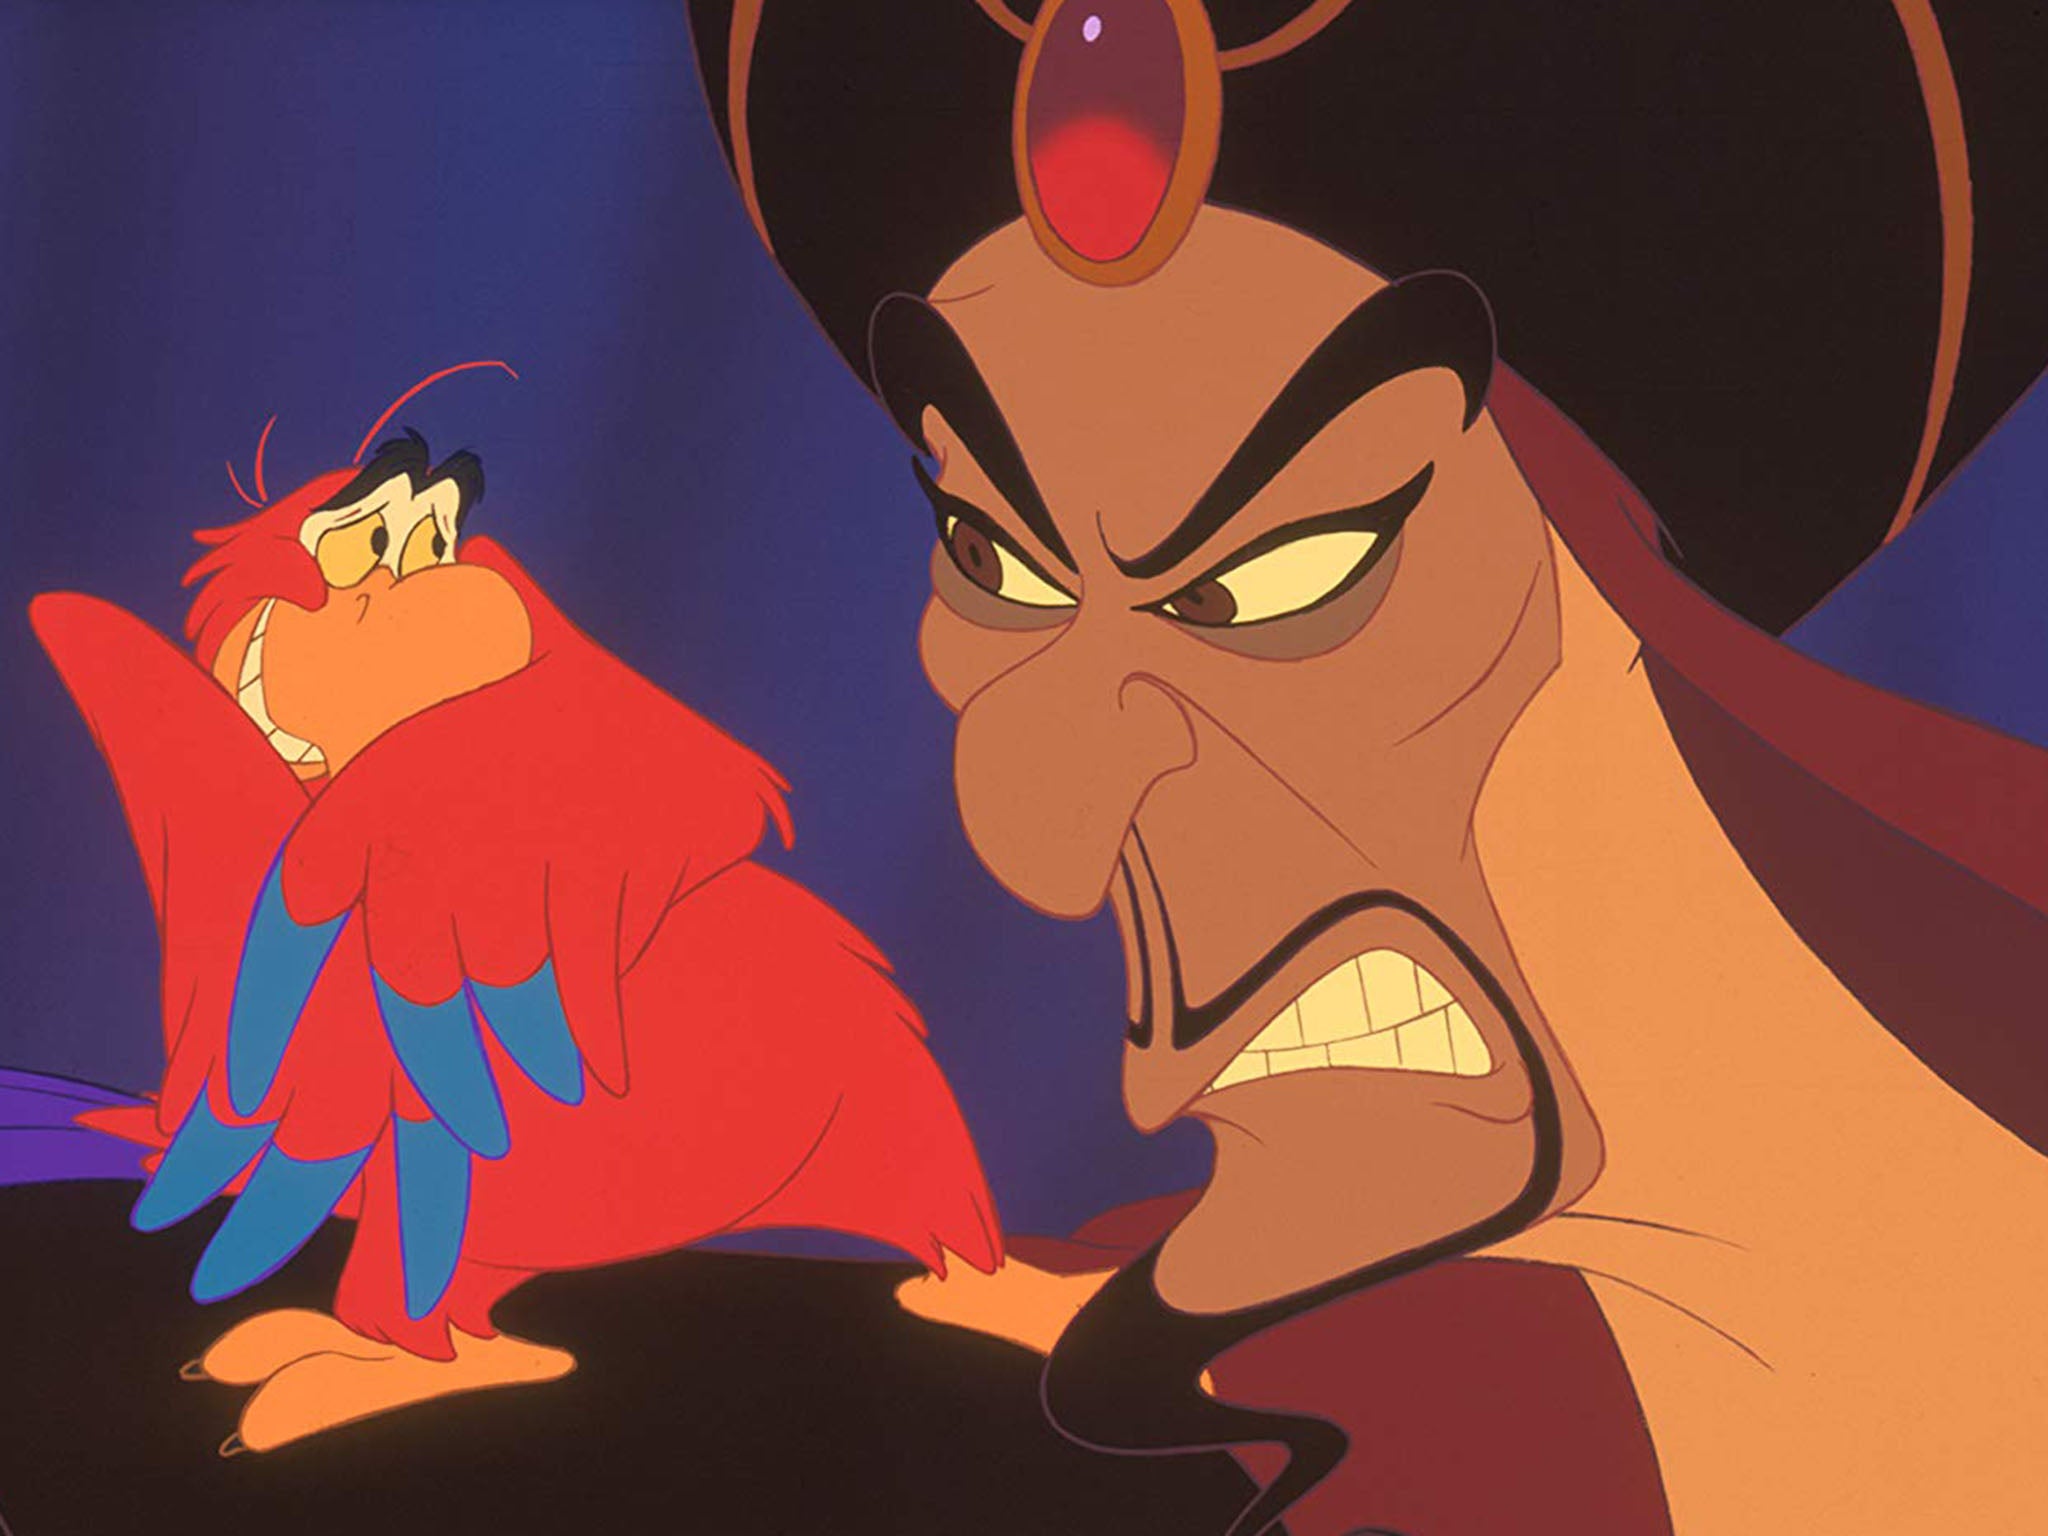 Jafar’s features, voice and character in the animated film perpetuated a racist stereotype